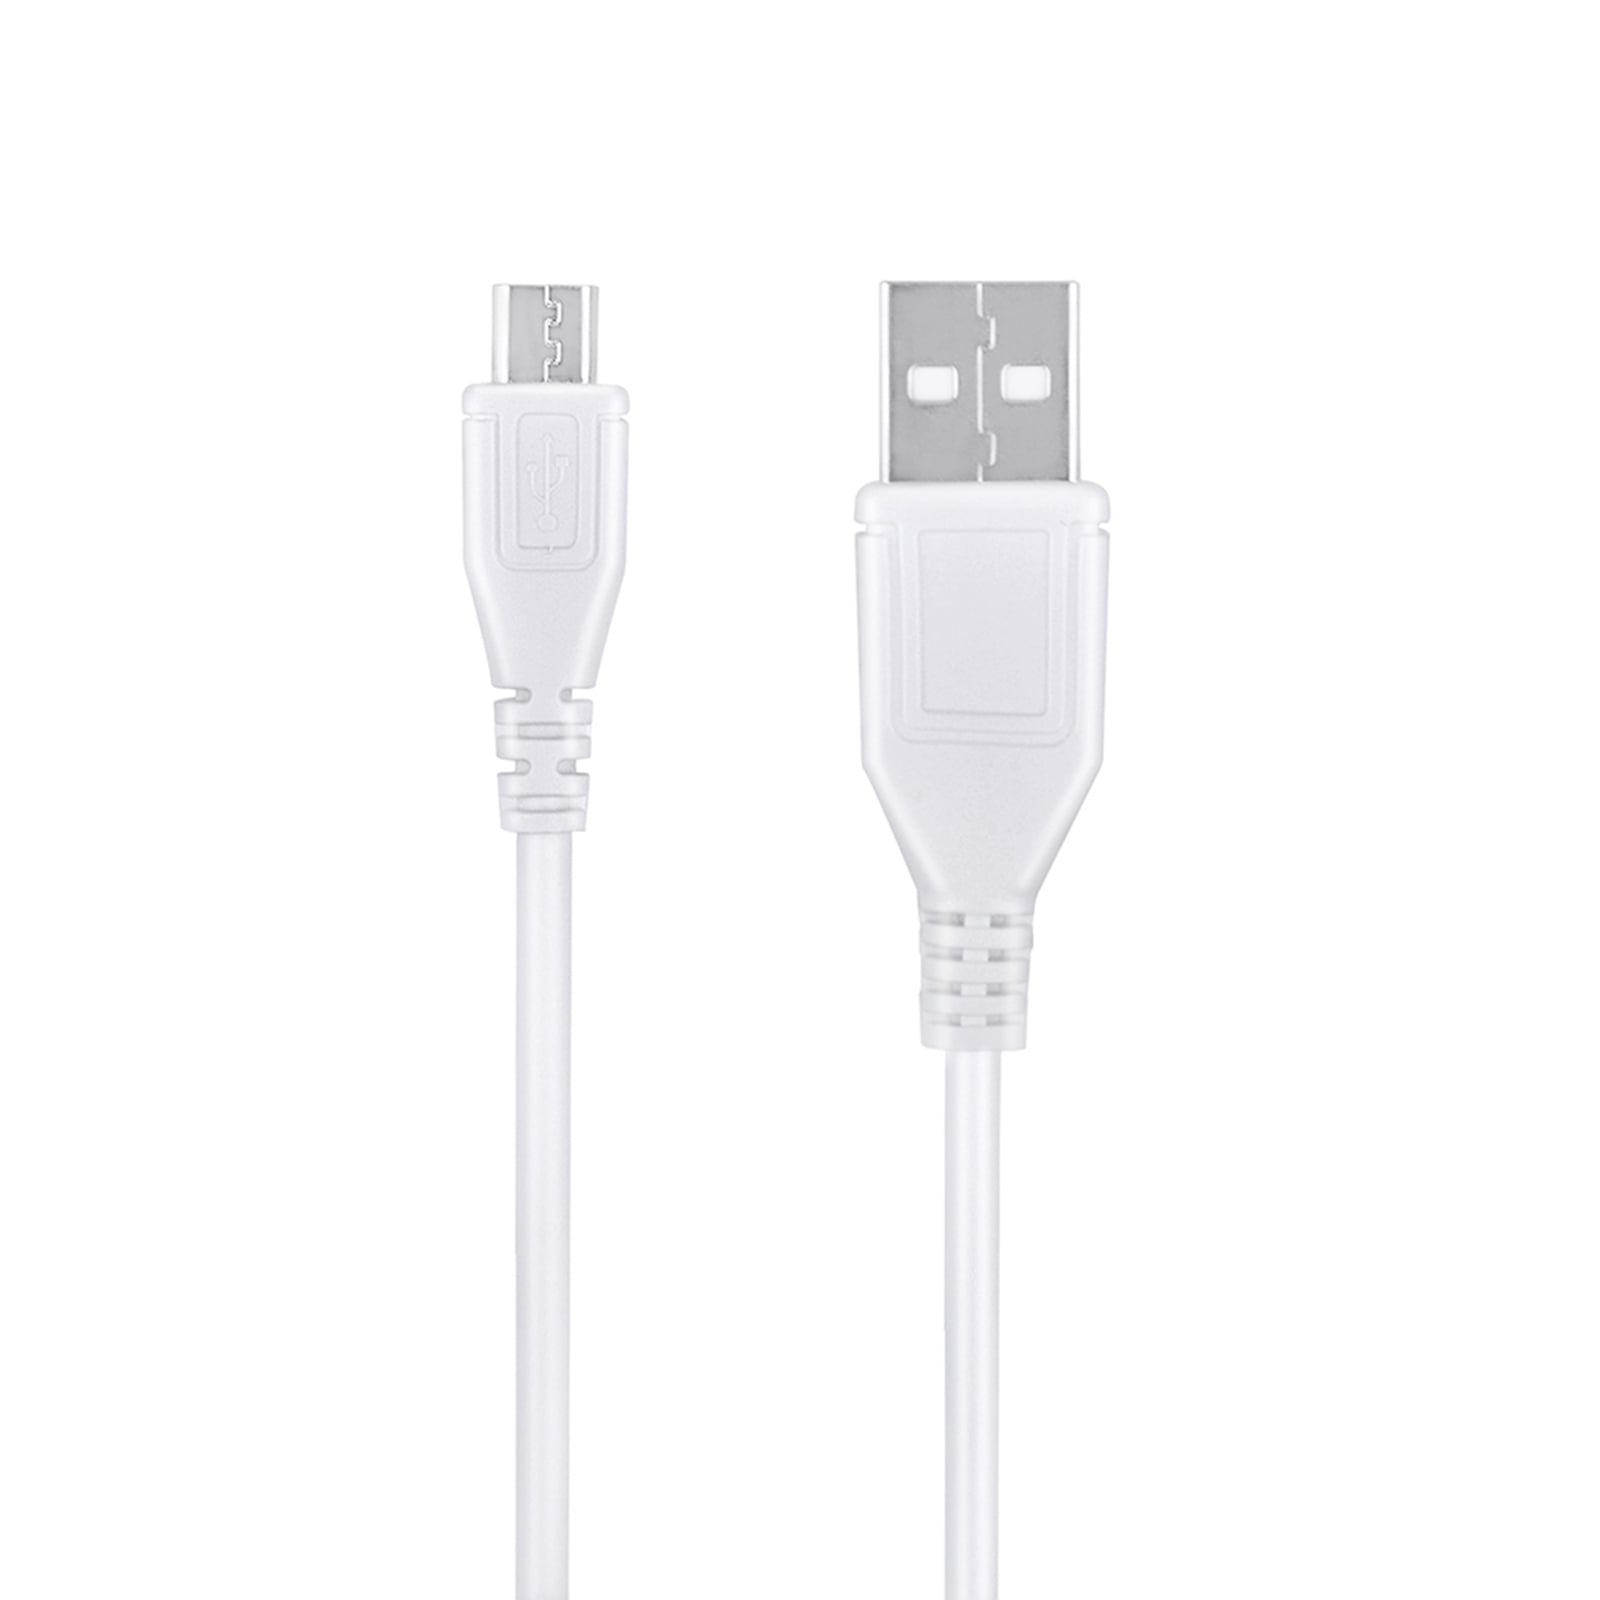 for Trio Stealth G5 10.1" Tablet USB Data Sync Charge Cable Cord 